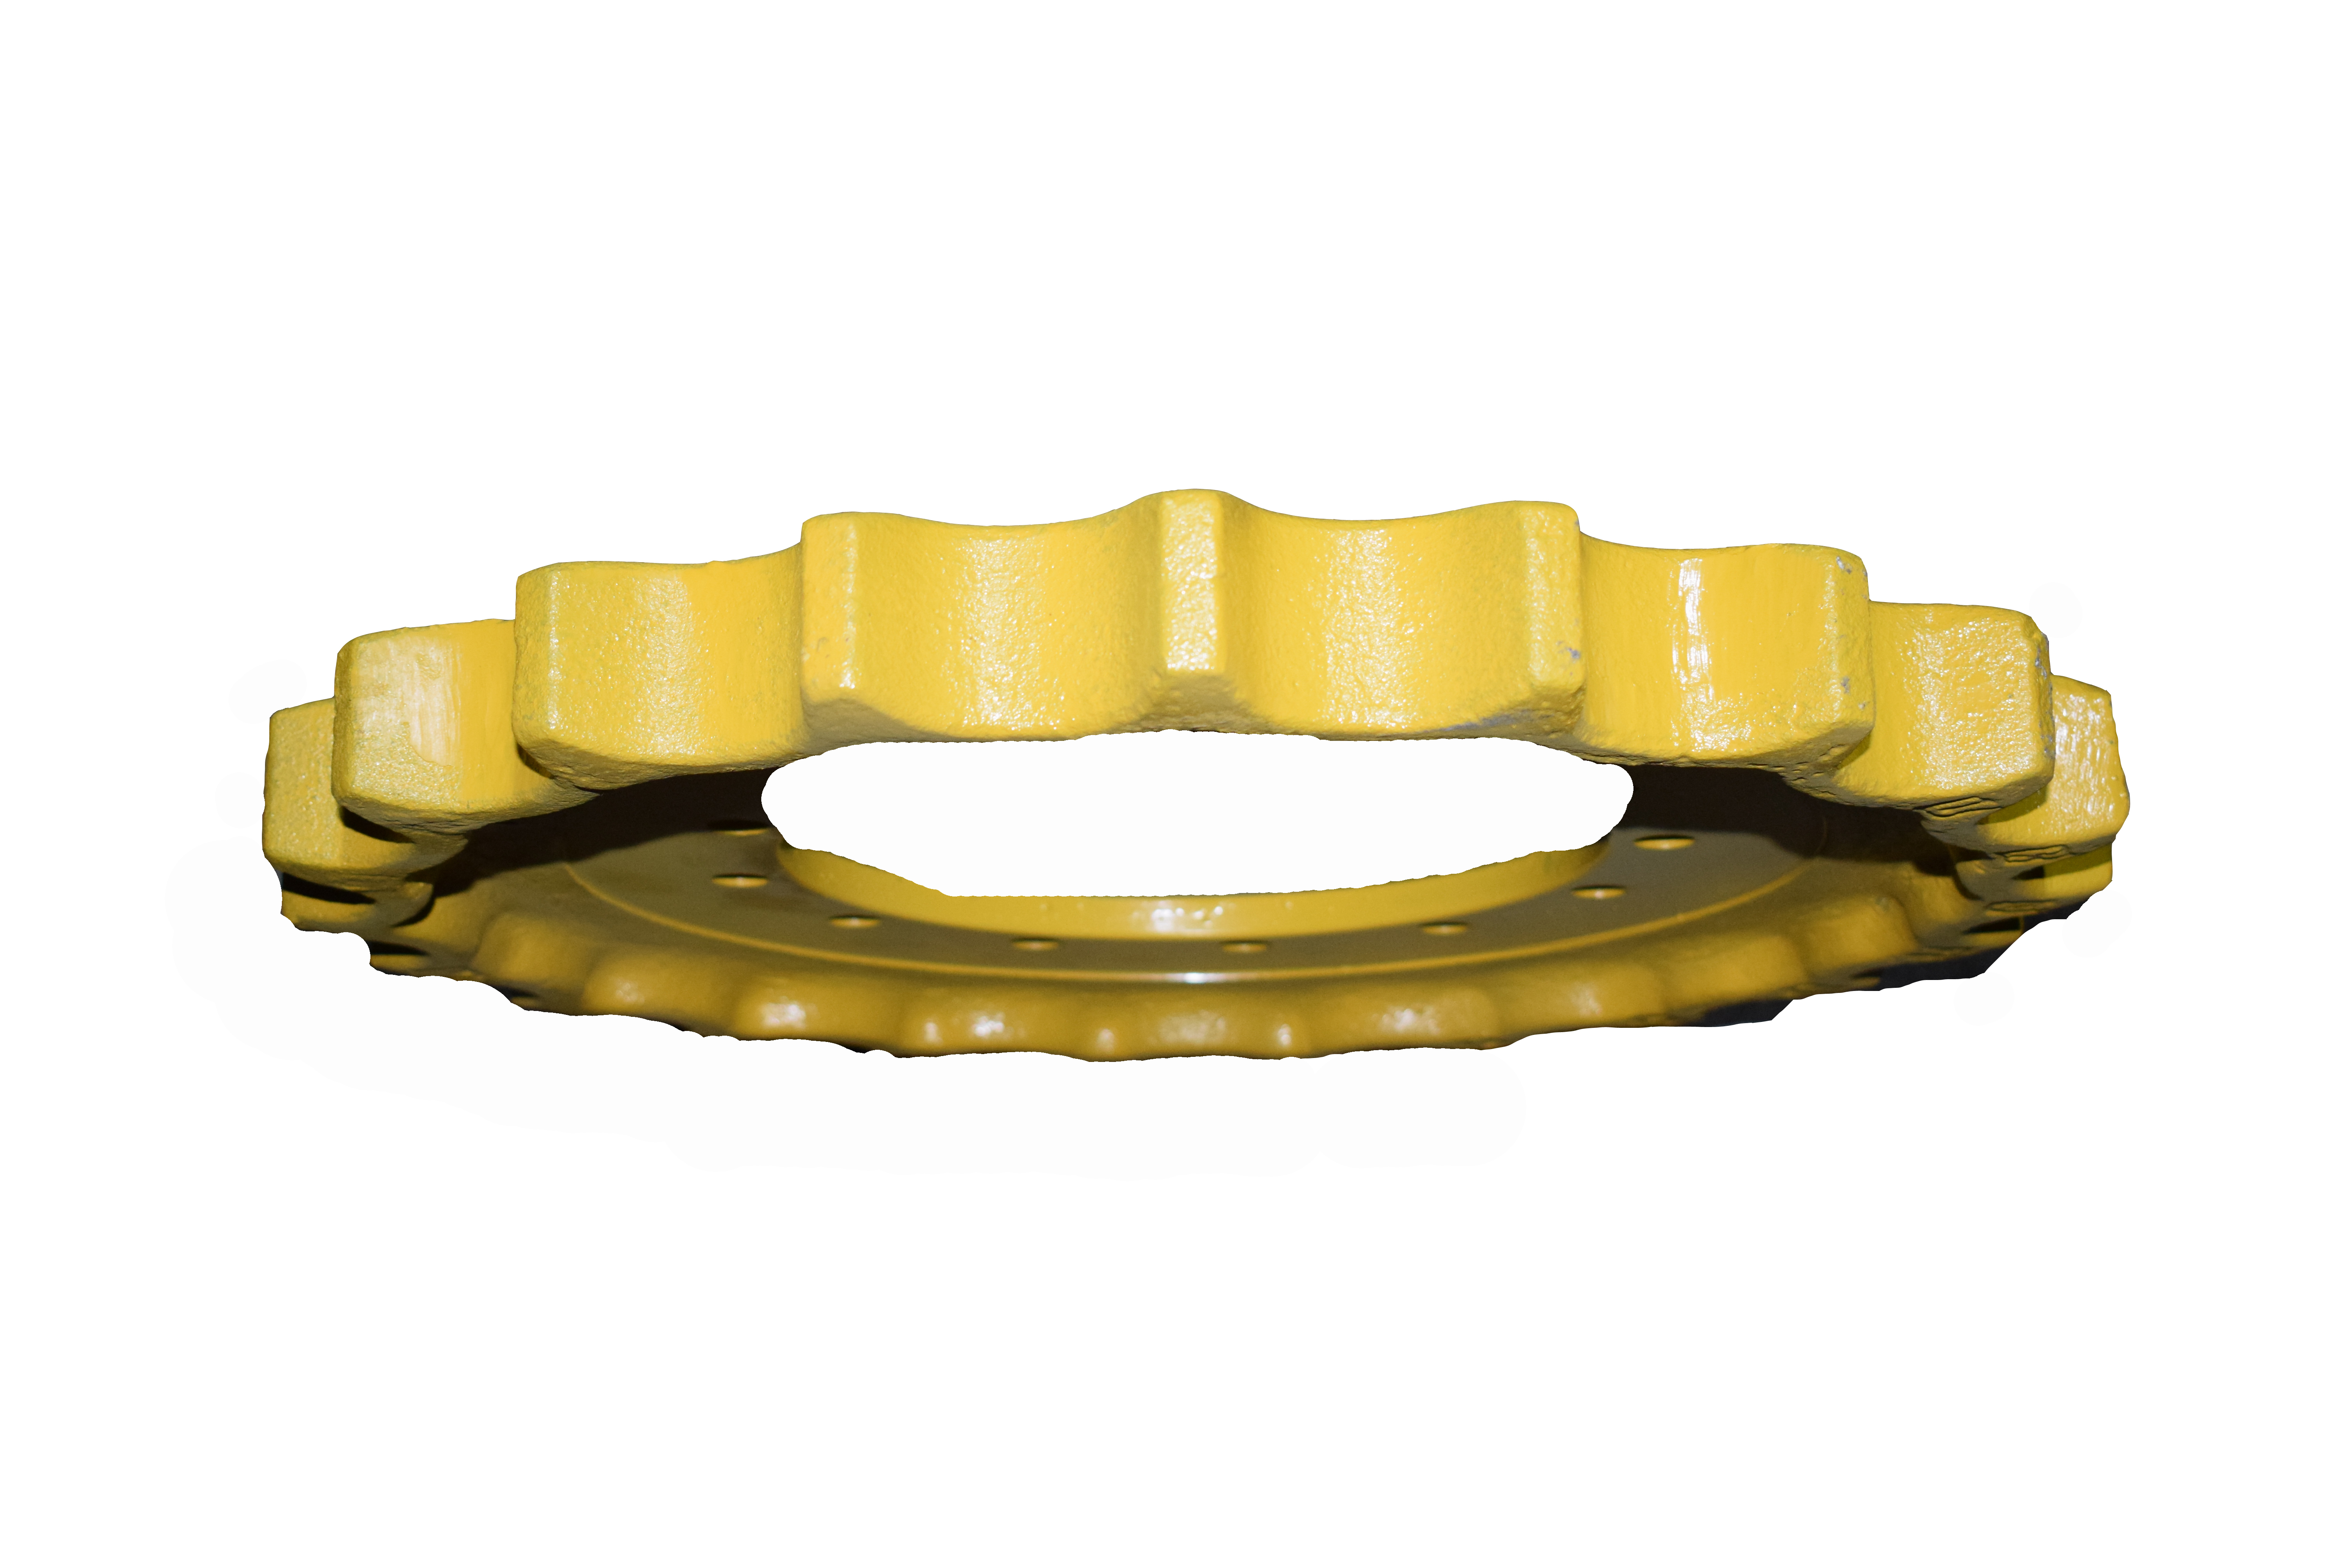 ZX200LC 1018740 Sprocket Undercarriage